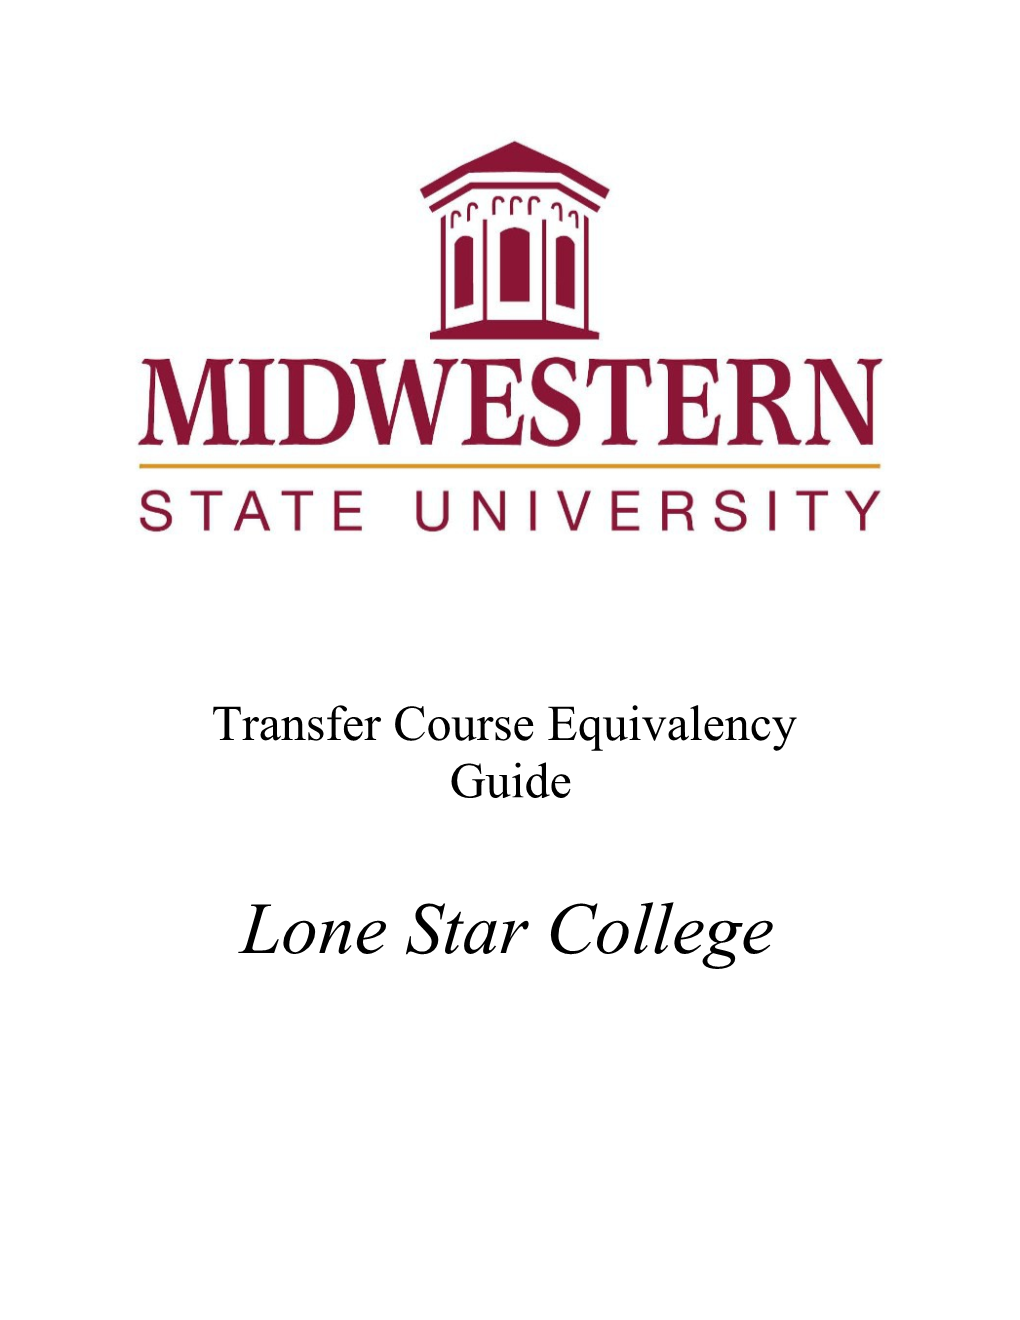 Use This Checklist to Mark the Courses Taken at Lone Star College